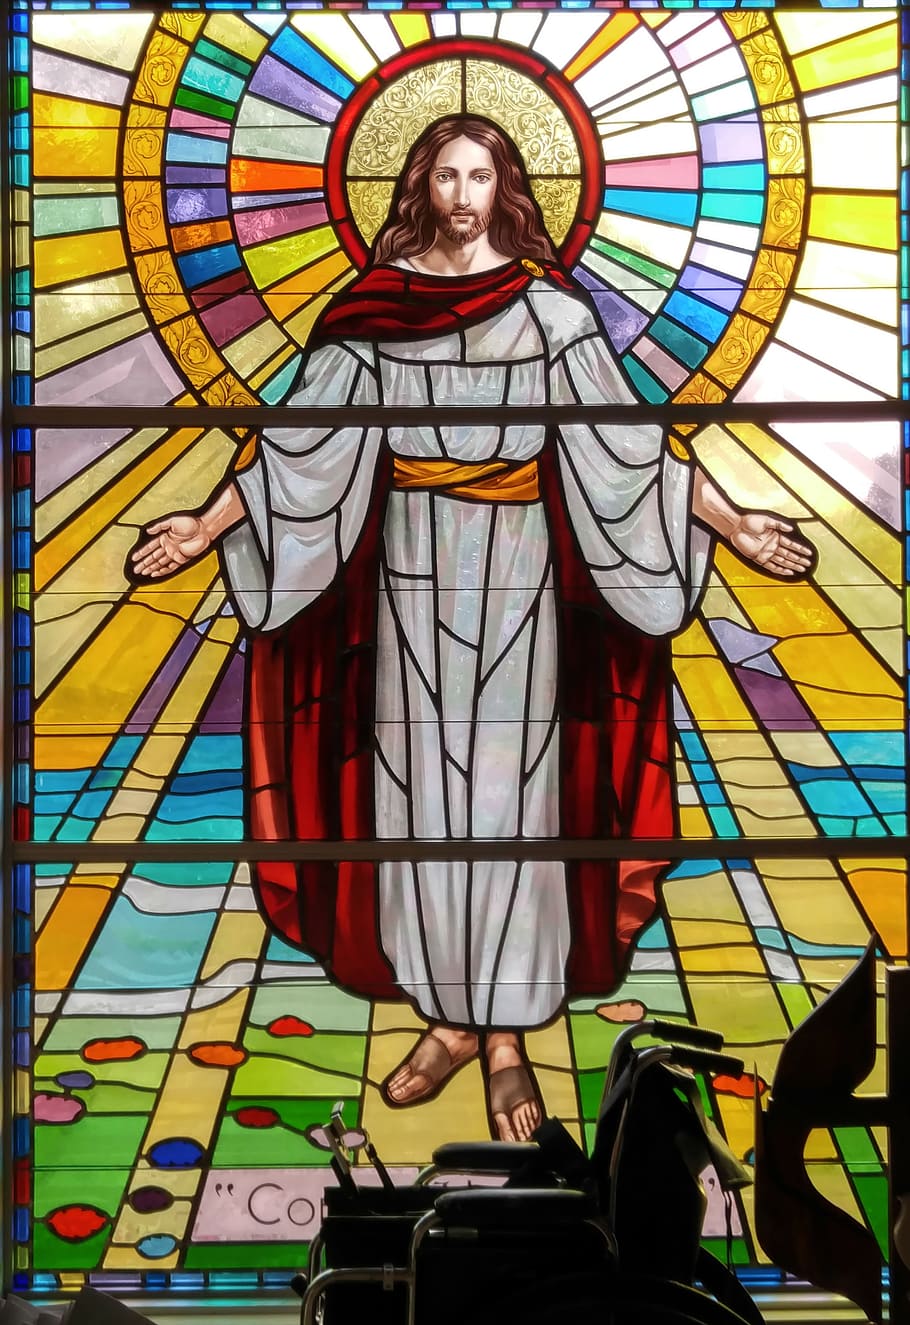 A stained glass window of jesus christ.